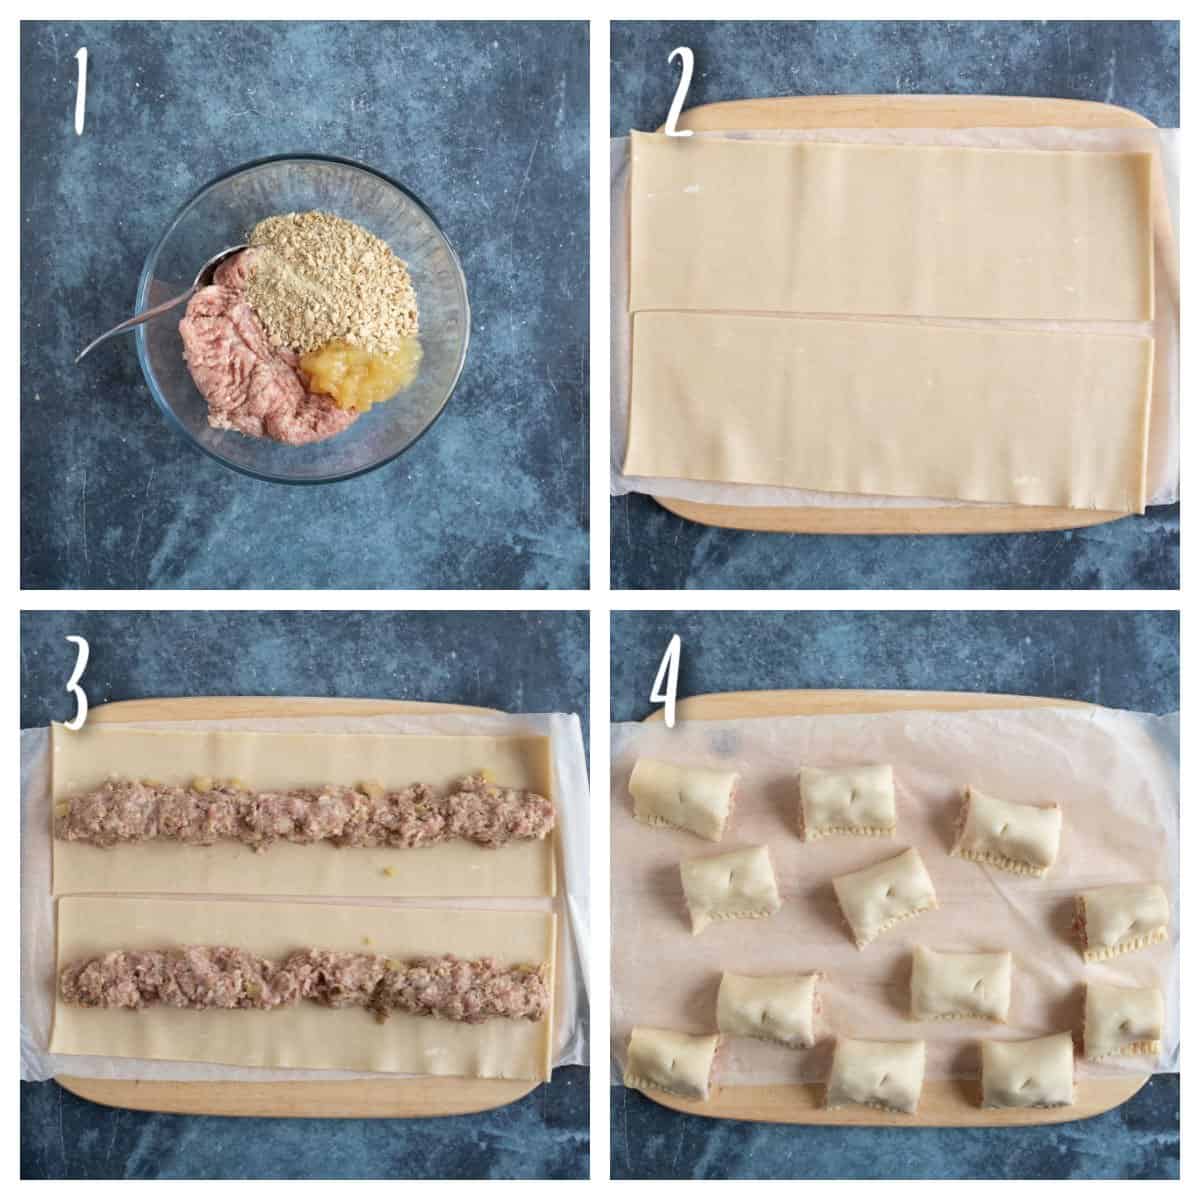 Step by step photo instructions for assembling the sausage rolls.